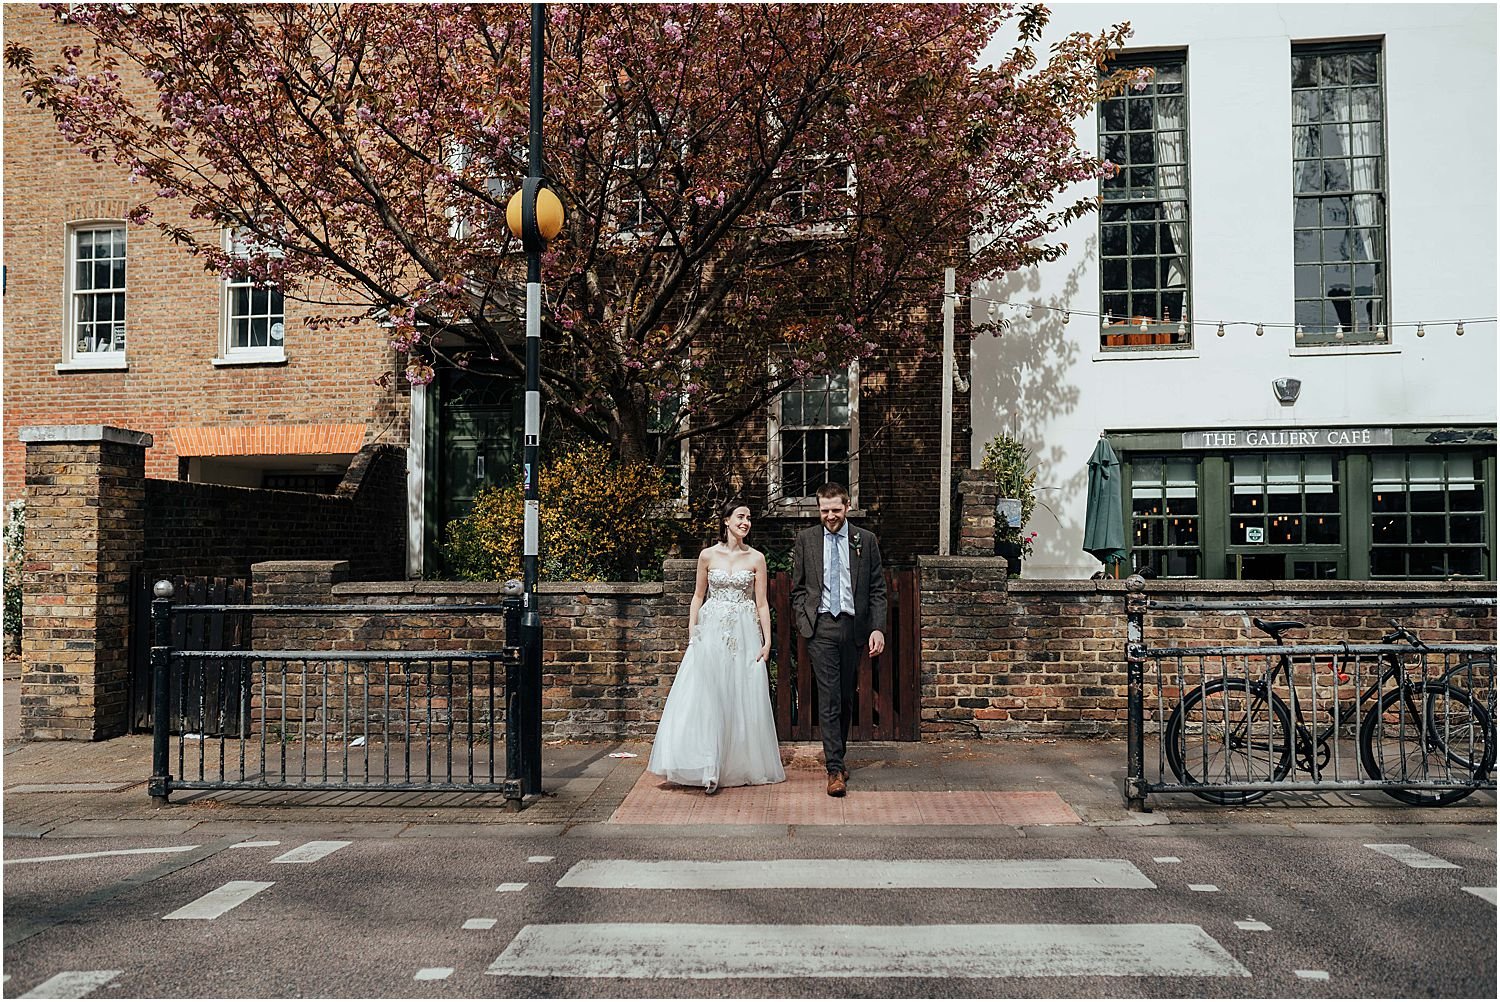 Bride and groom on their wedding day in Bethnal Green